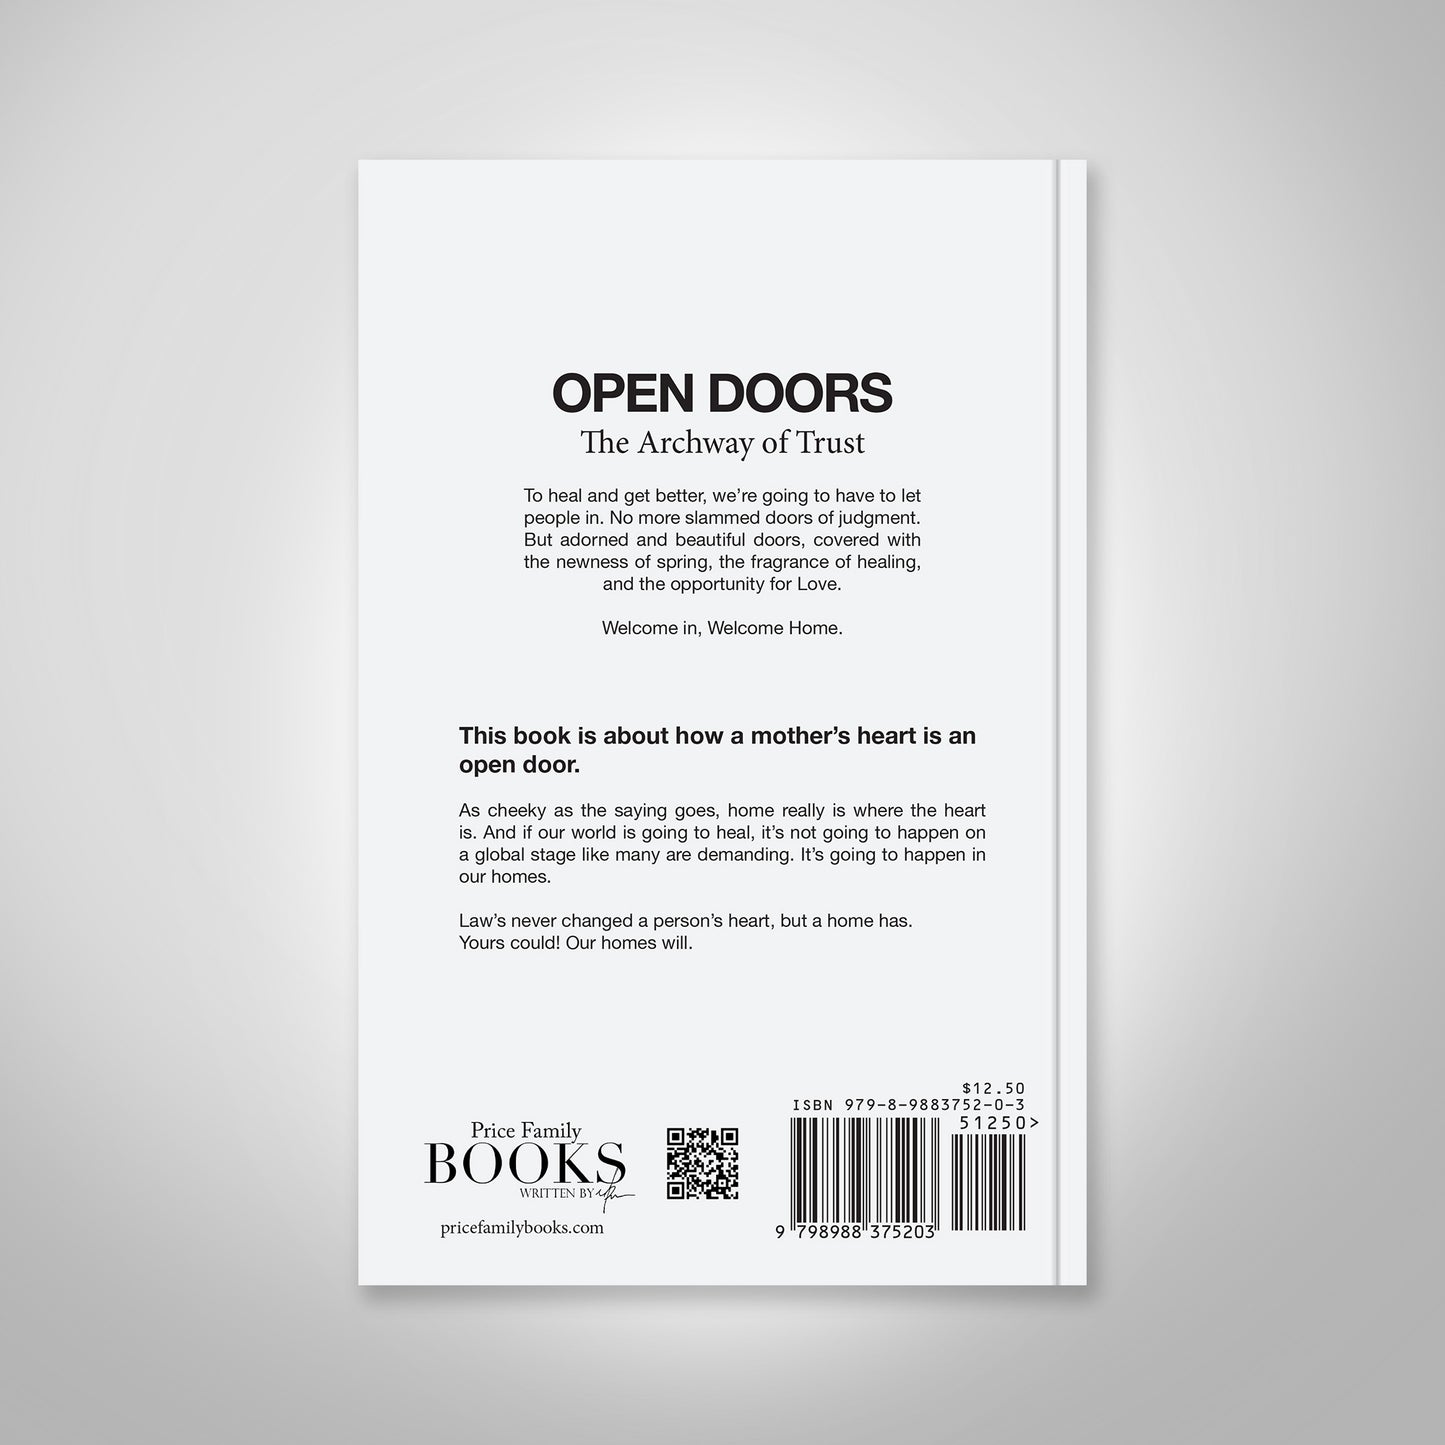 Open Doors: The Archway of Trust Back Cover by Matthew M. Price